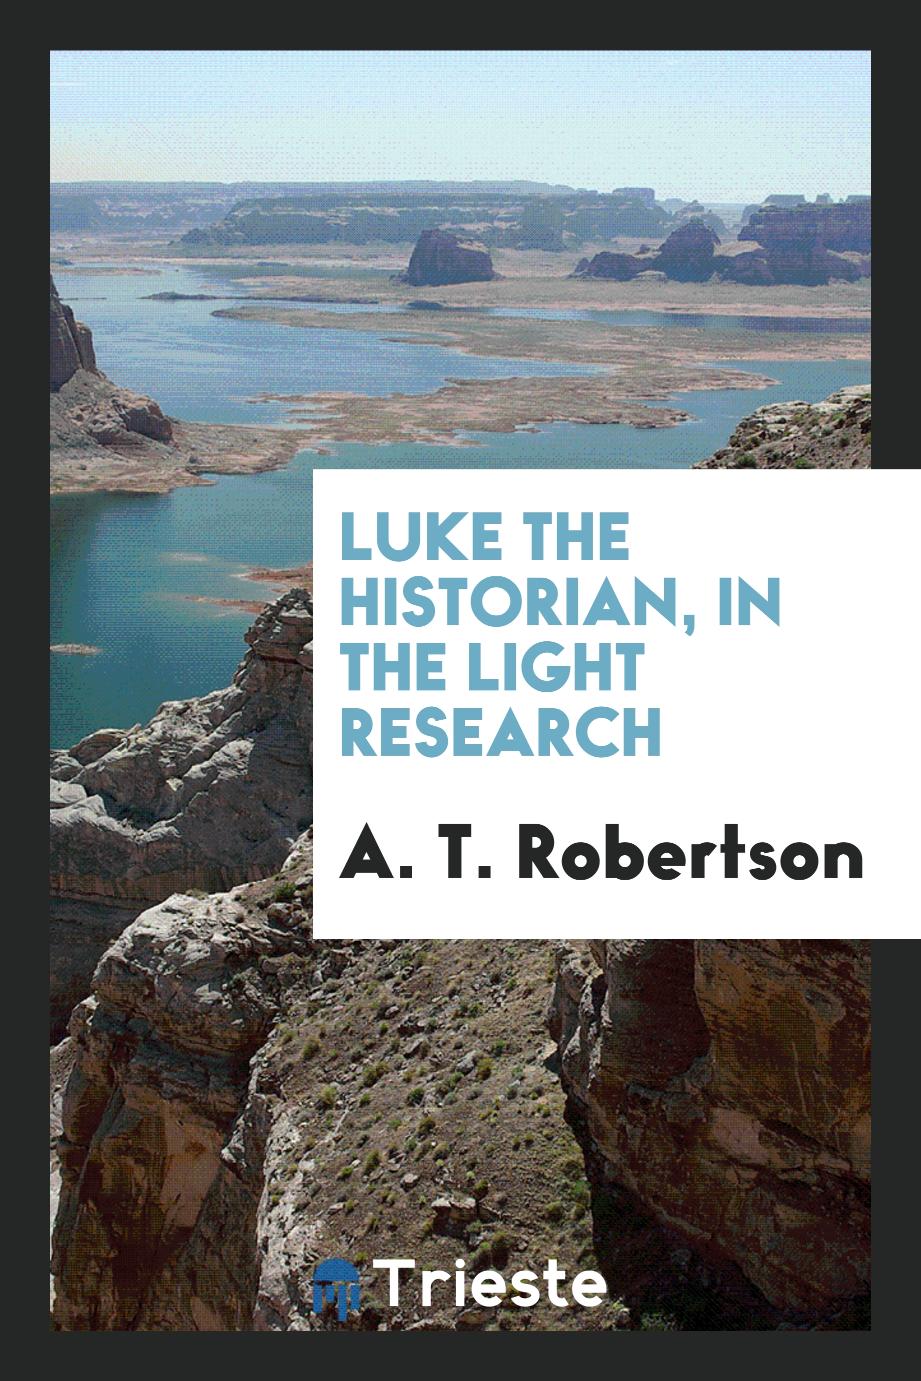 Luke the historian, in the light research